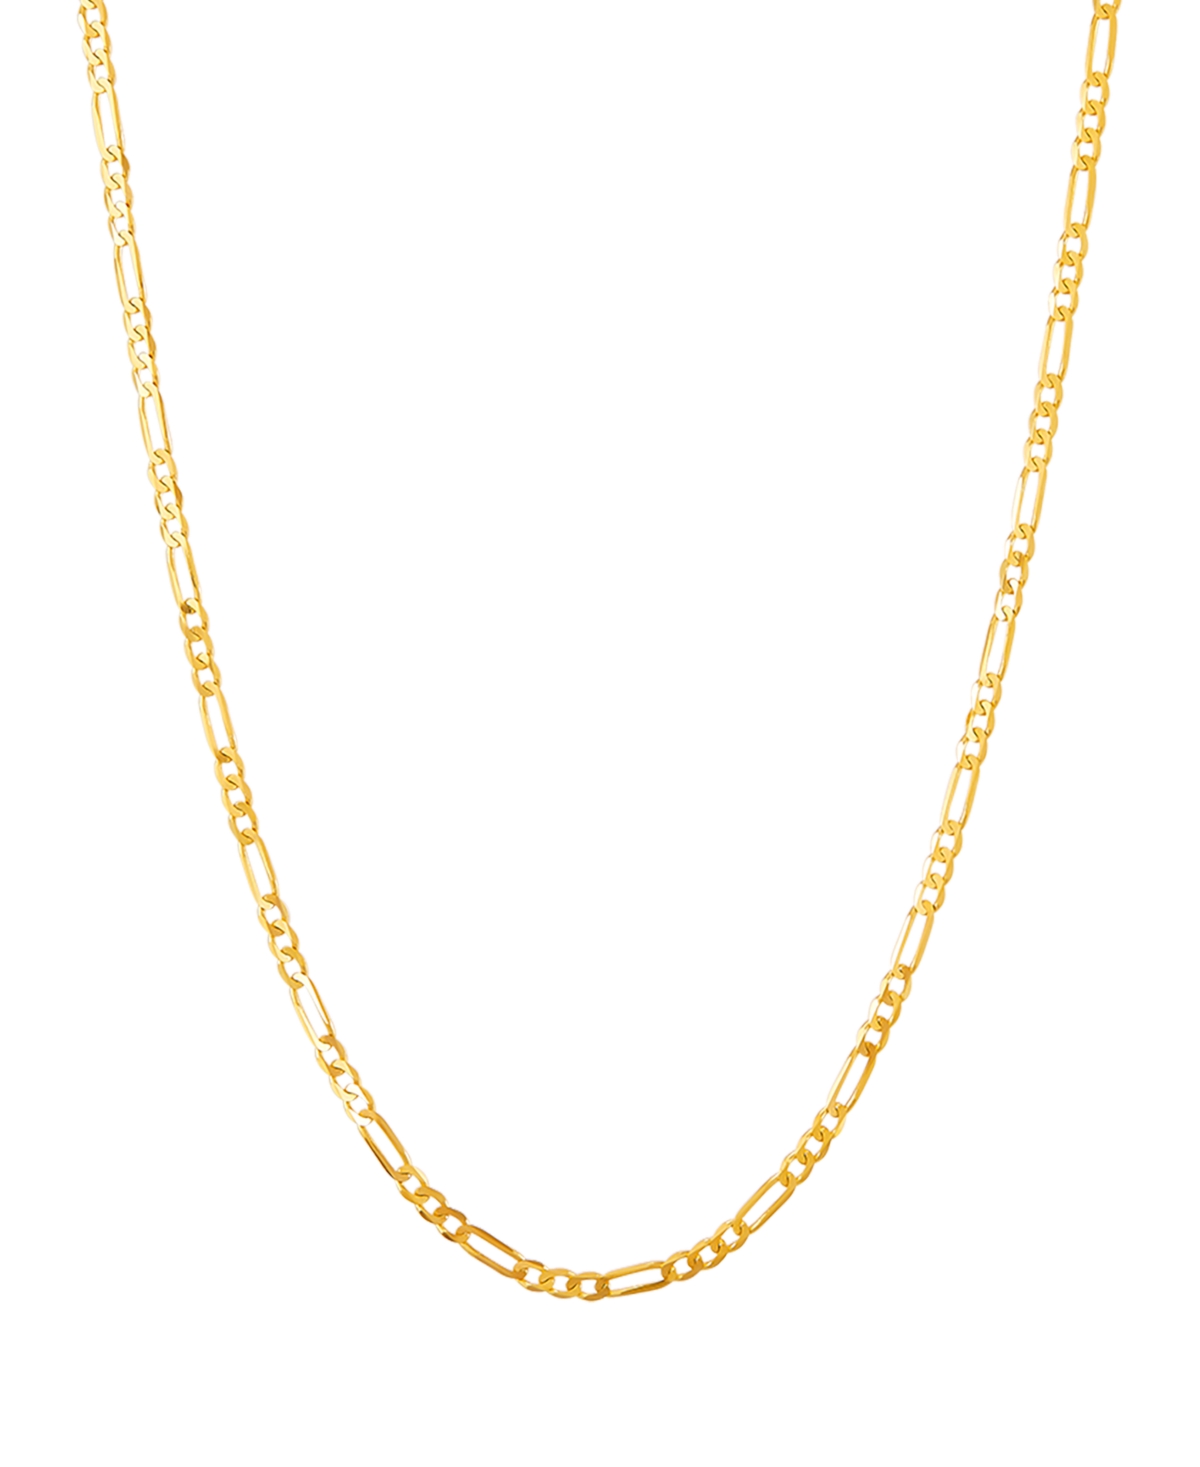 ITALIAN GOLD POLISHED 20" FIGARO CHAIN (1.85MM) IN 10K YELLOW GOLD